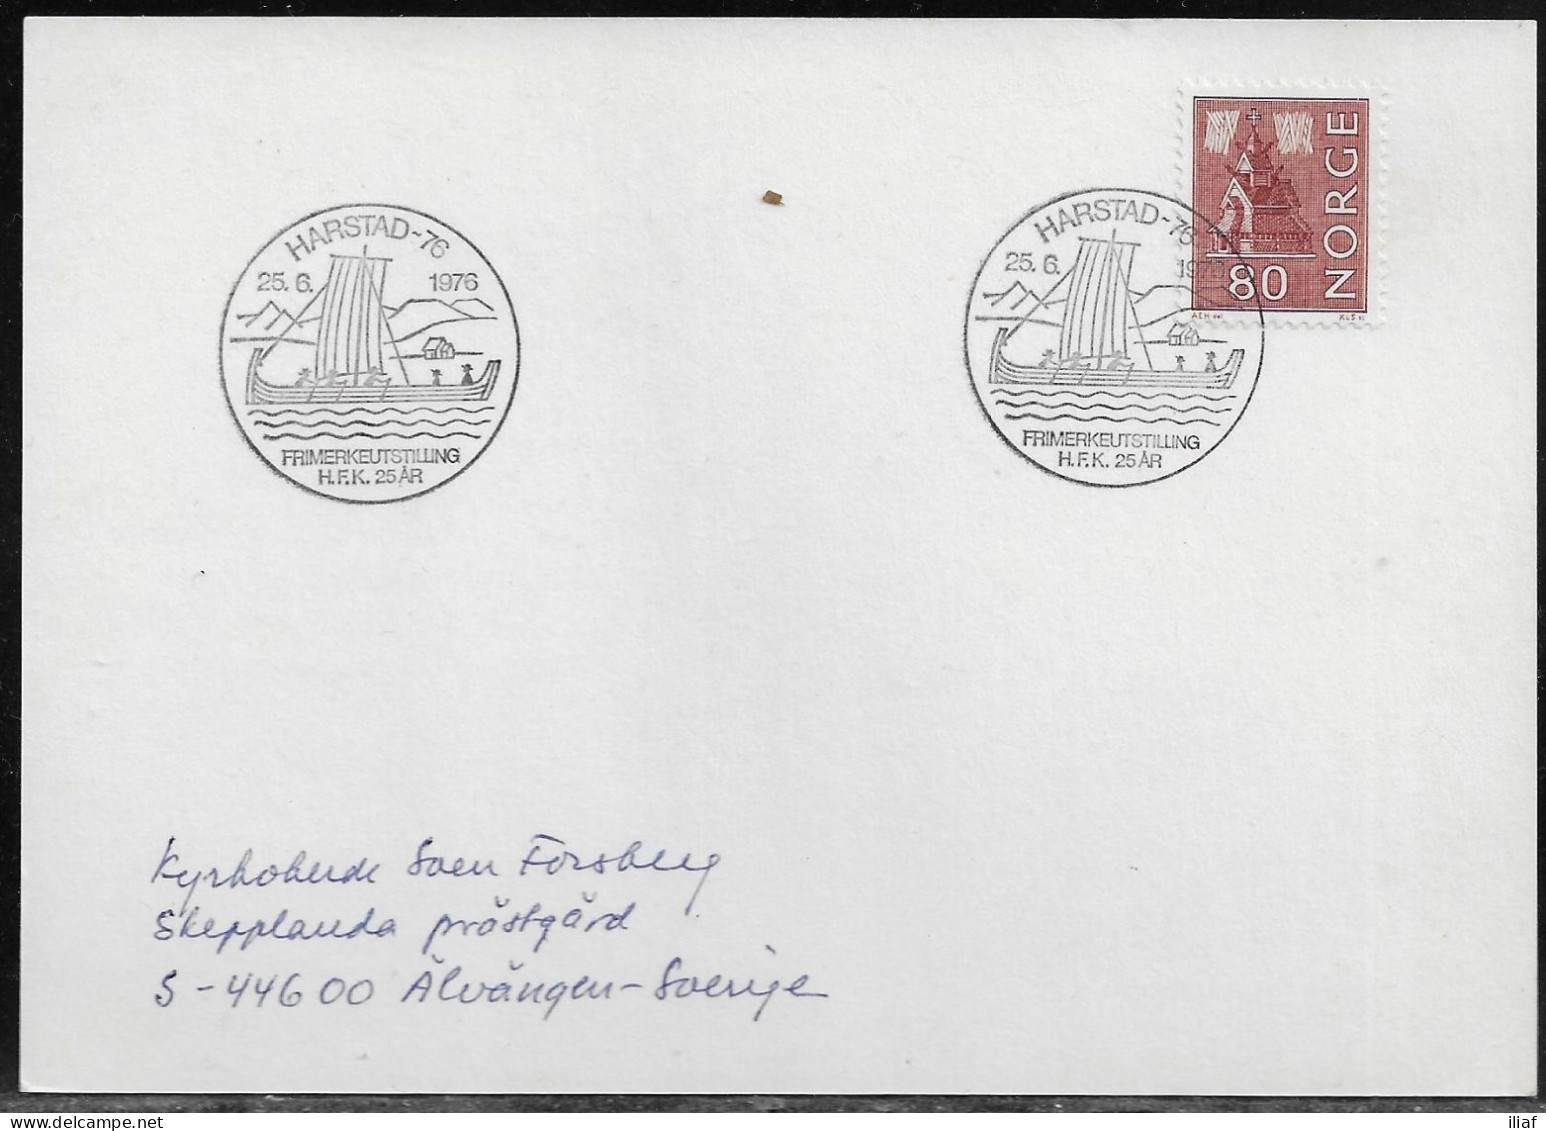 Norway.   HARSTAD-76, STAMP EXHIBITION, H.F.K. 25 YEARS.   Norway Special Event Postmark. - Storia Postale